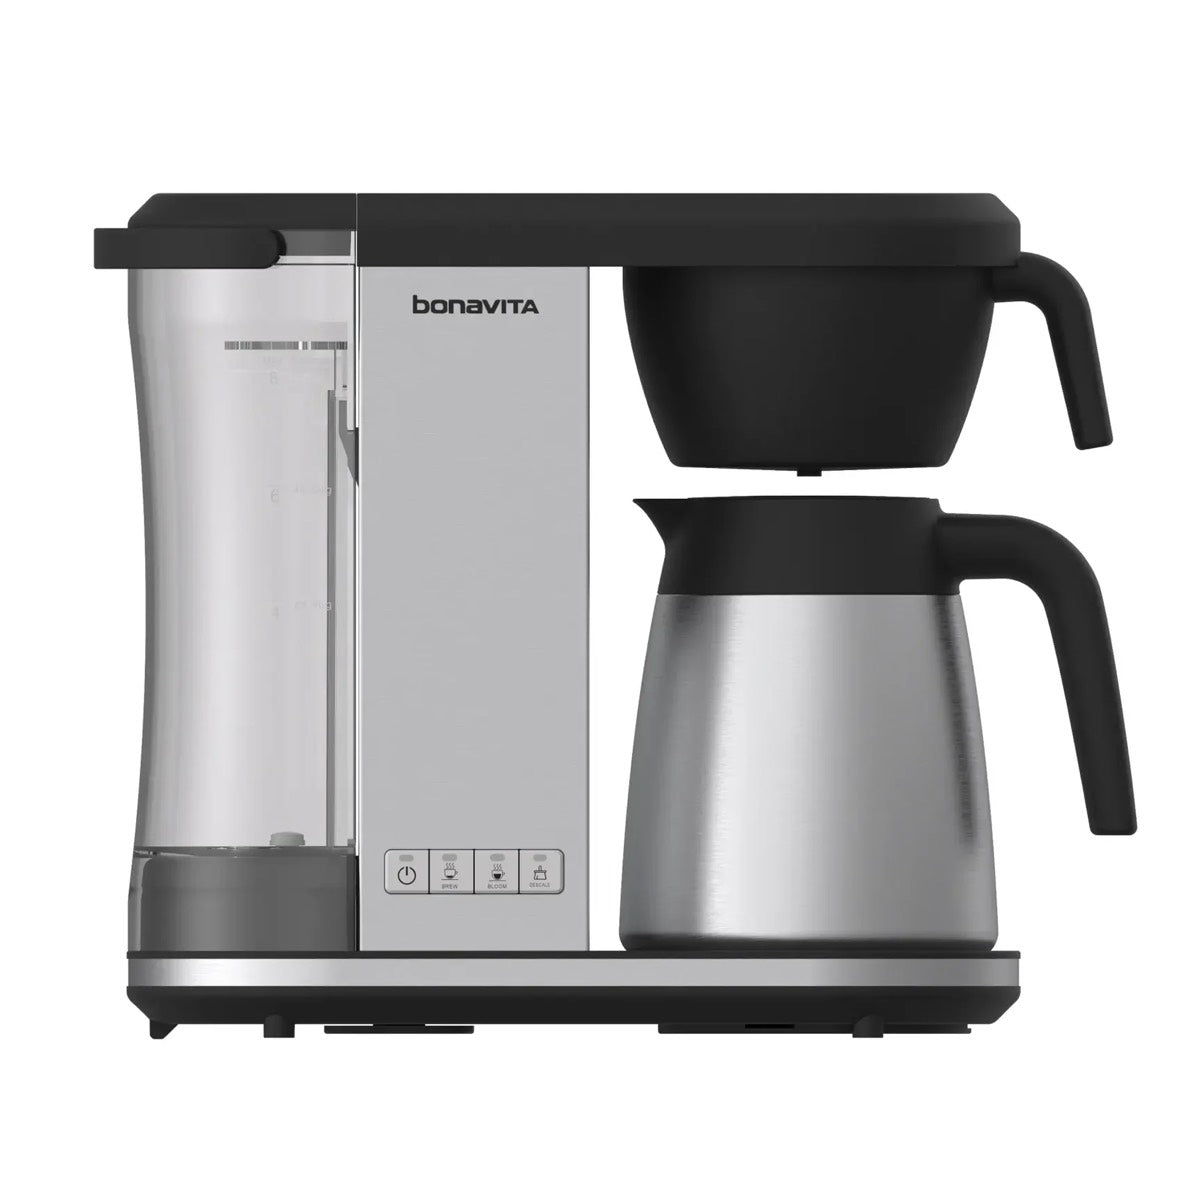 Bonavita Enthusiast Drip Coffee Brewer with Thermal Carafe - 8-Cup - Image 1